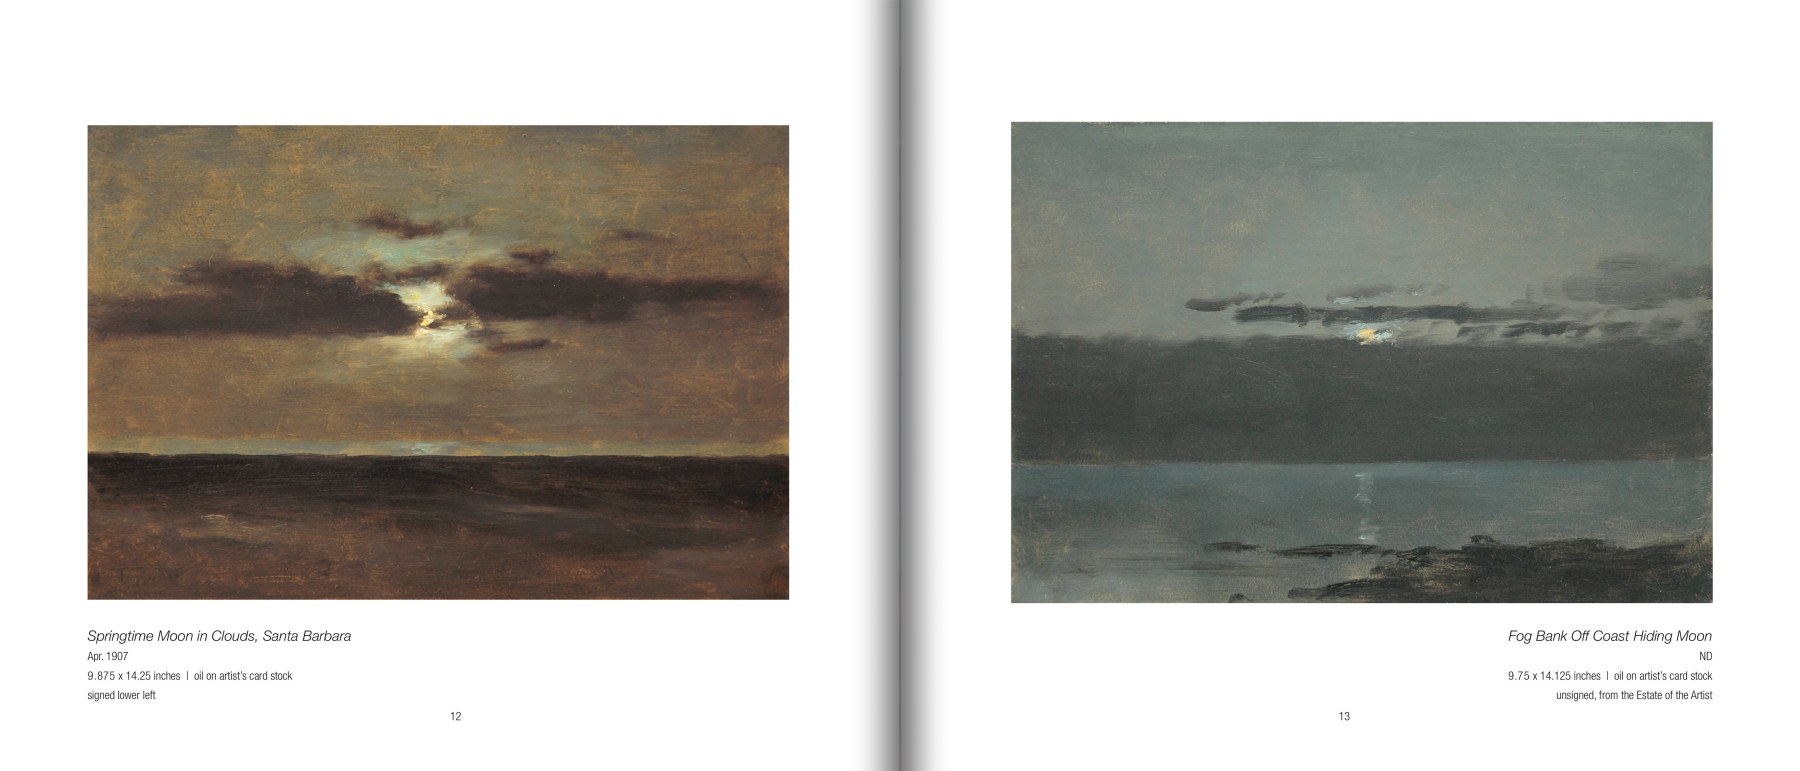 Pages 12 and 13 of 40 NIGHTS: An Exhibition of the Night Paintings of Lockwood de Forest, featuring &quot;Springtime Moon in Clouds, Santa Barbara&quot;, Apr. 1907 and &quot;Fog Bank Off Coast Hiding Moon&quot; by Lockwood de Forest (1850-1932)